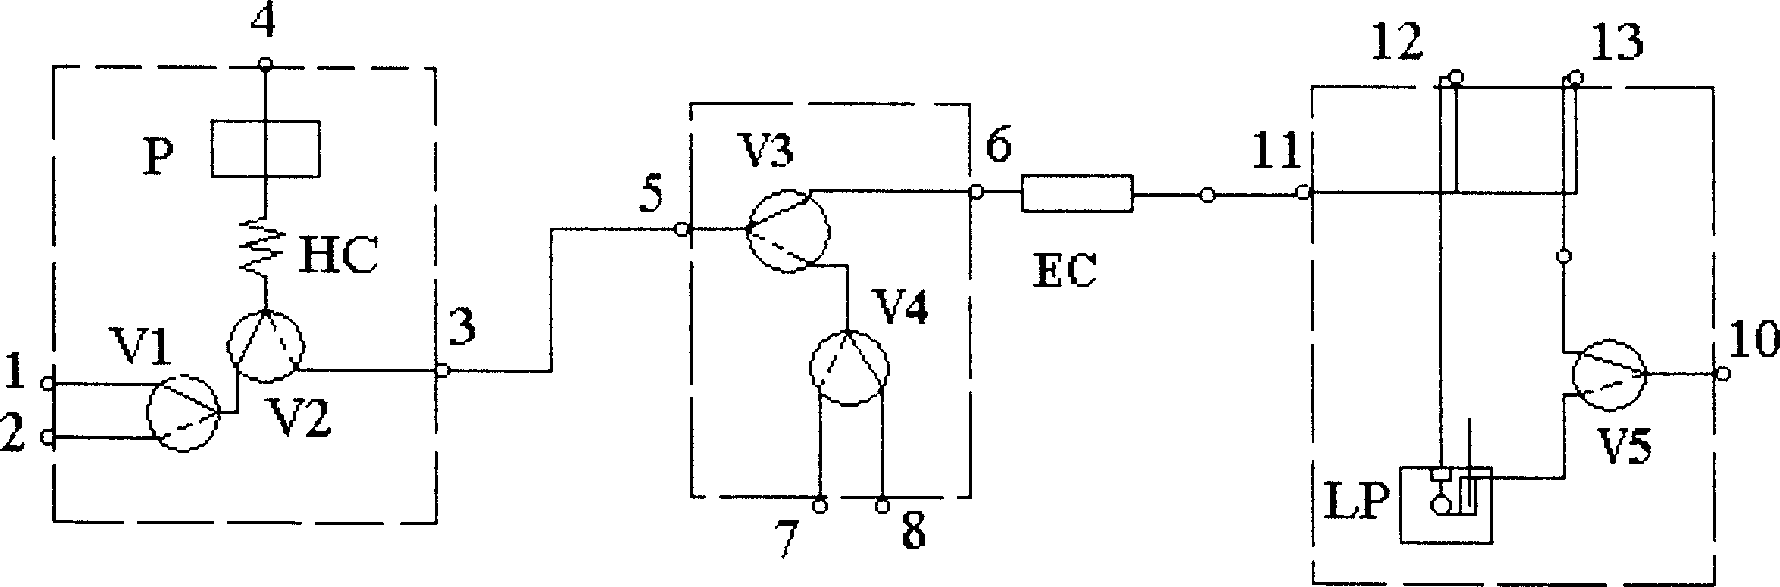 Dynamic and complete analysis system for dynamic electric current